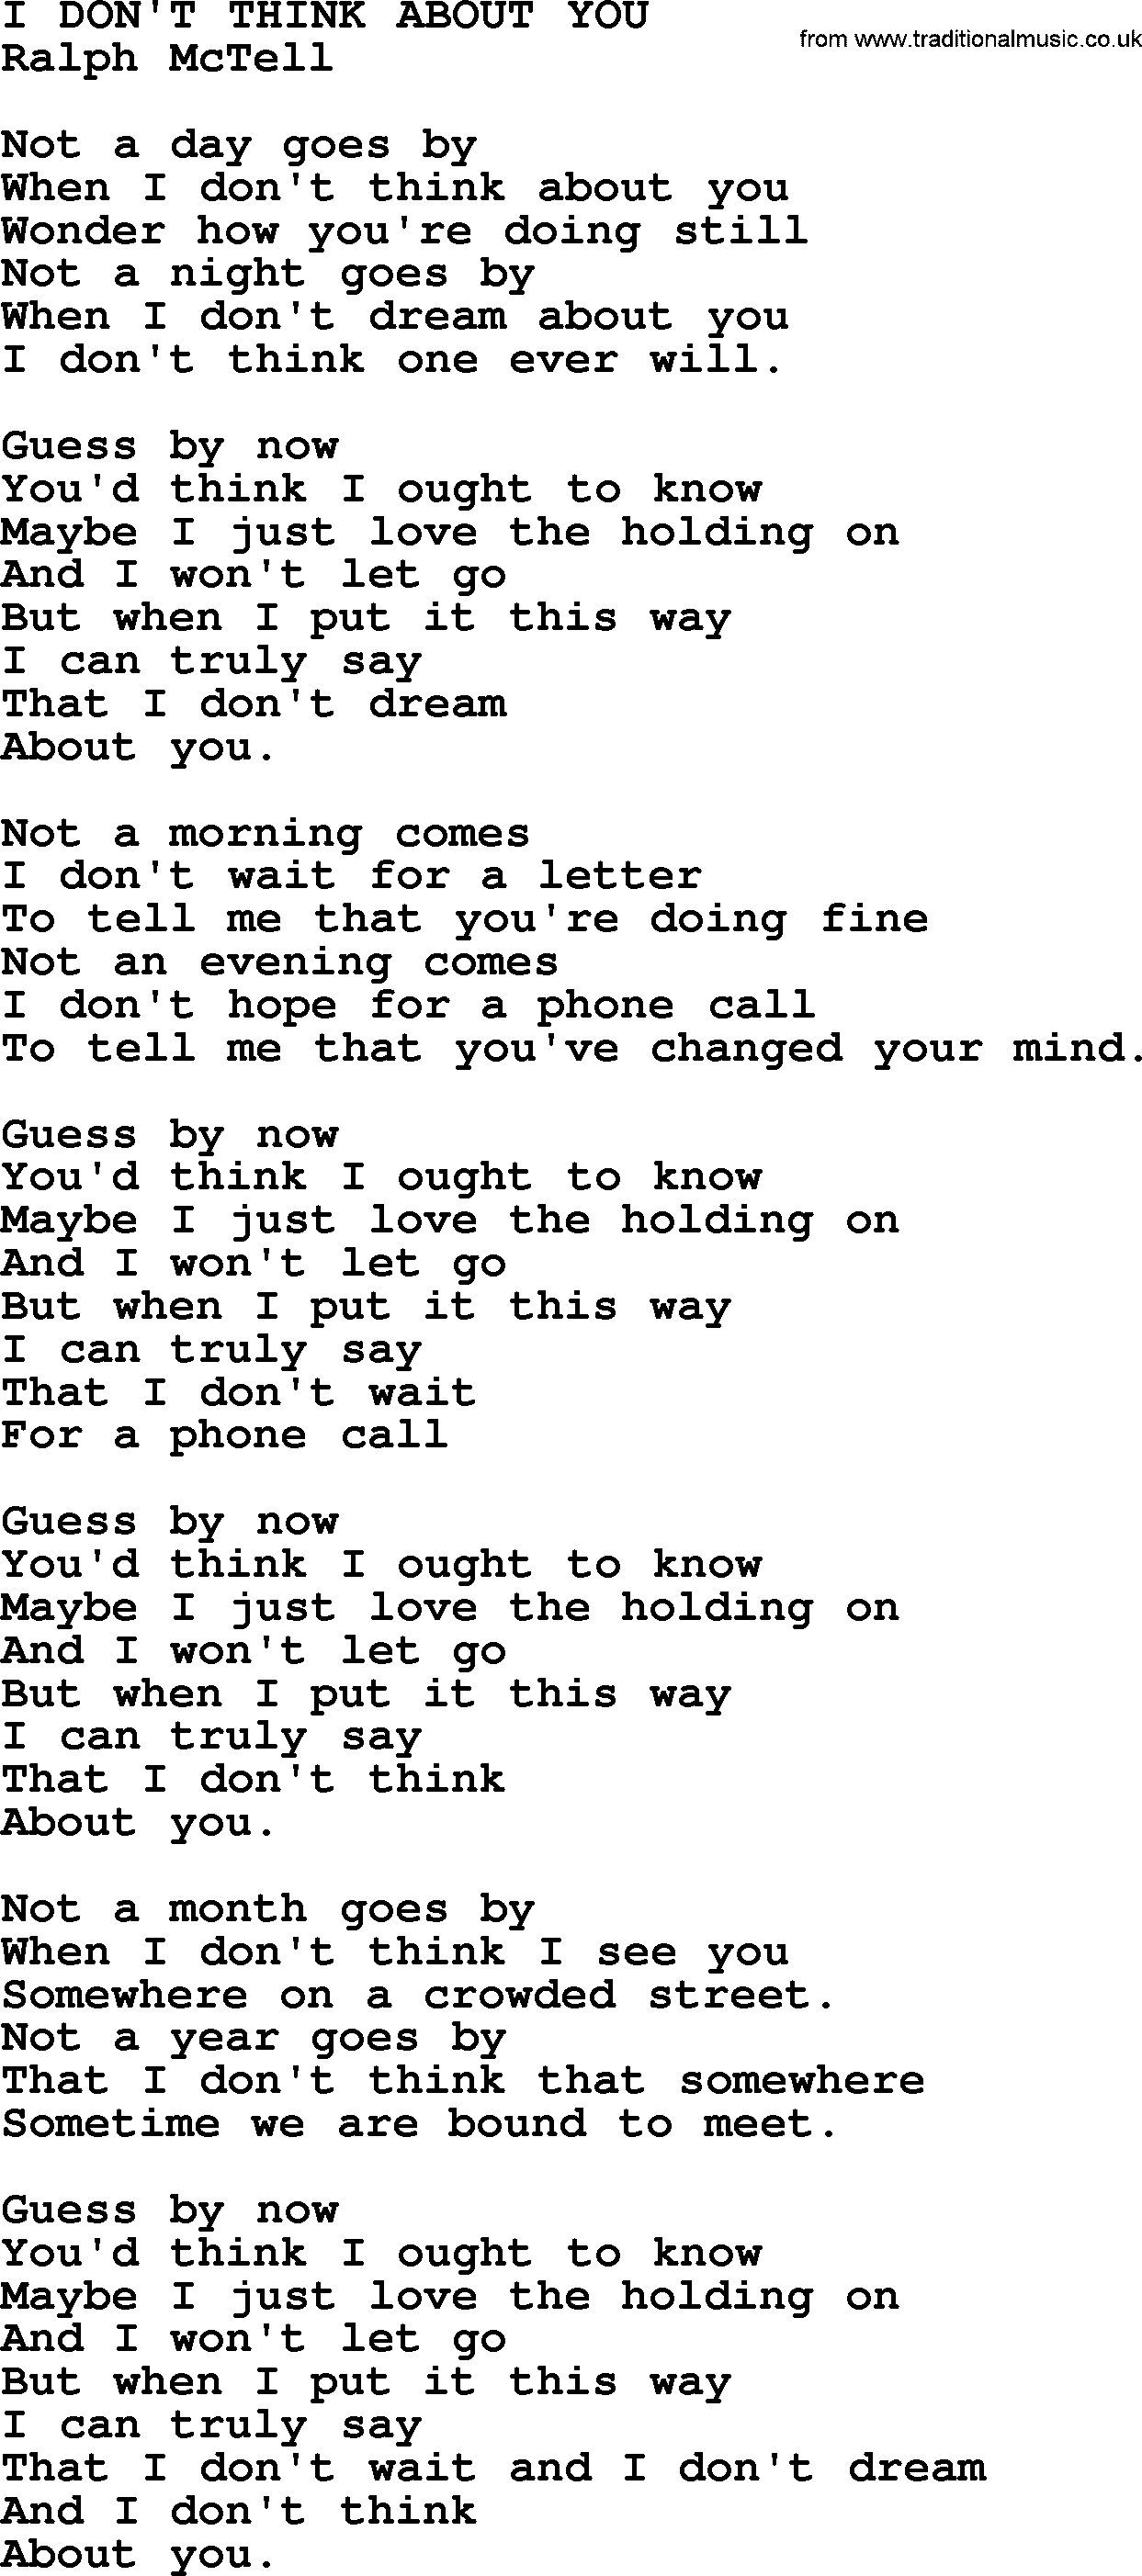 Ralph McTell Song: I Don't Think About You, lyrics